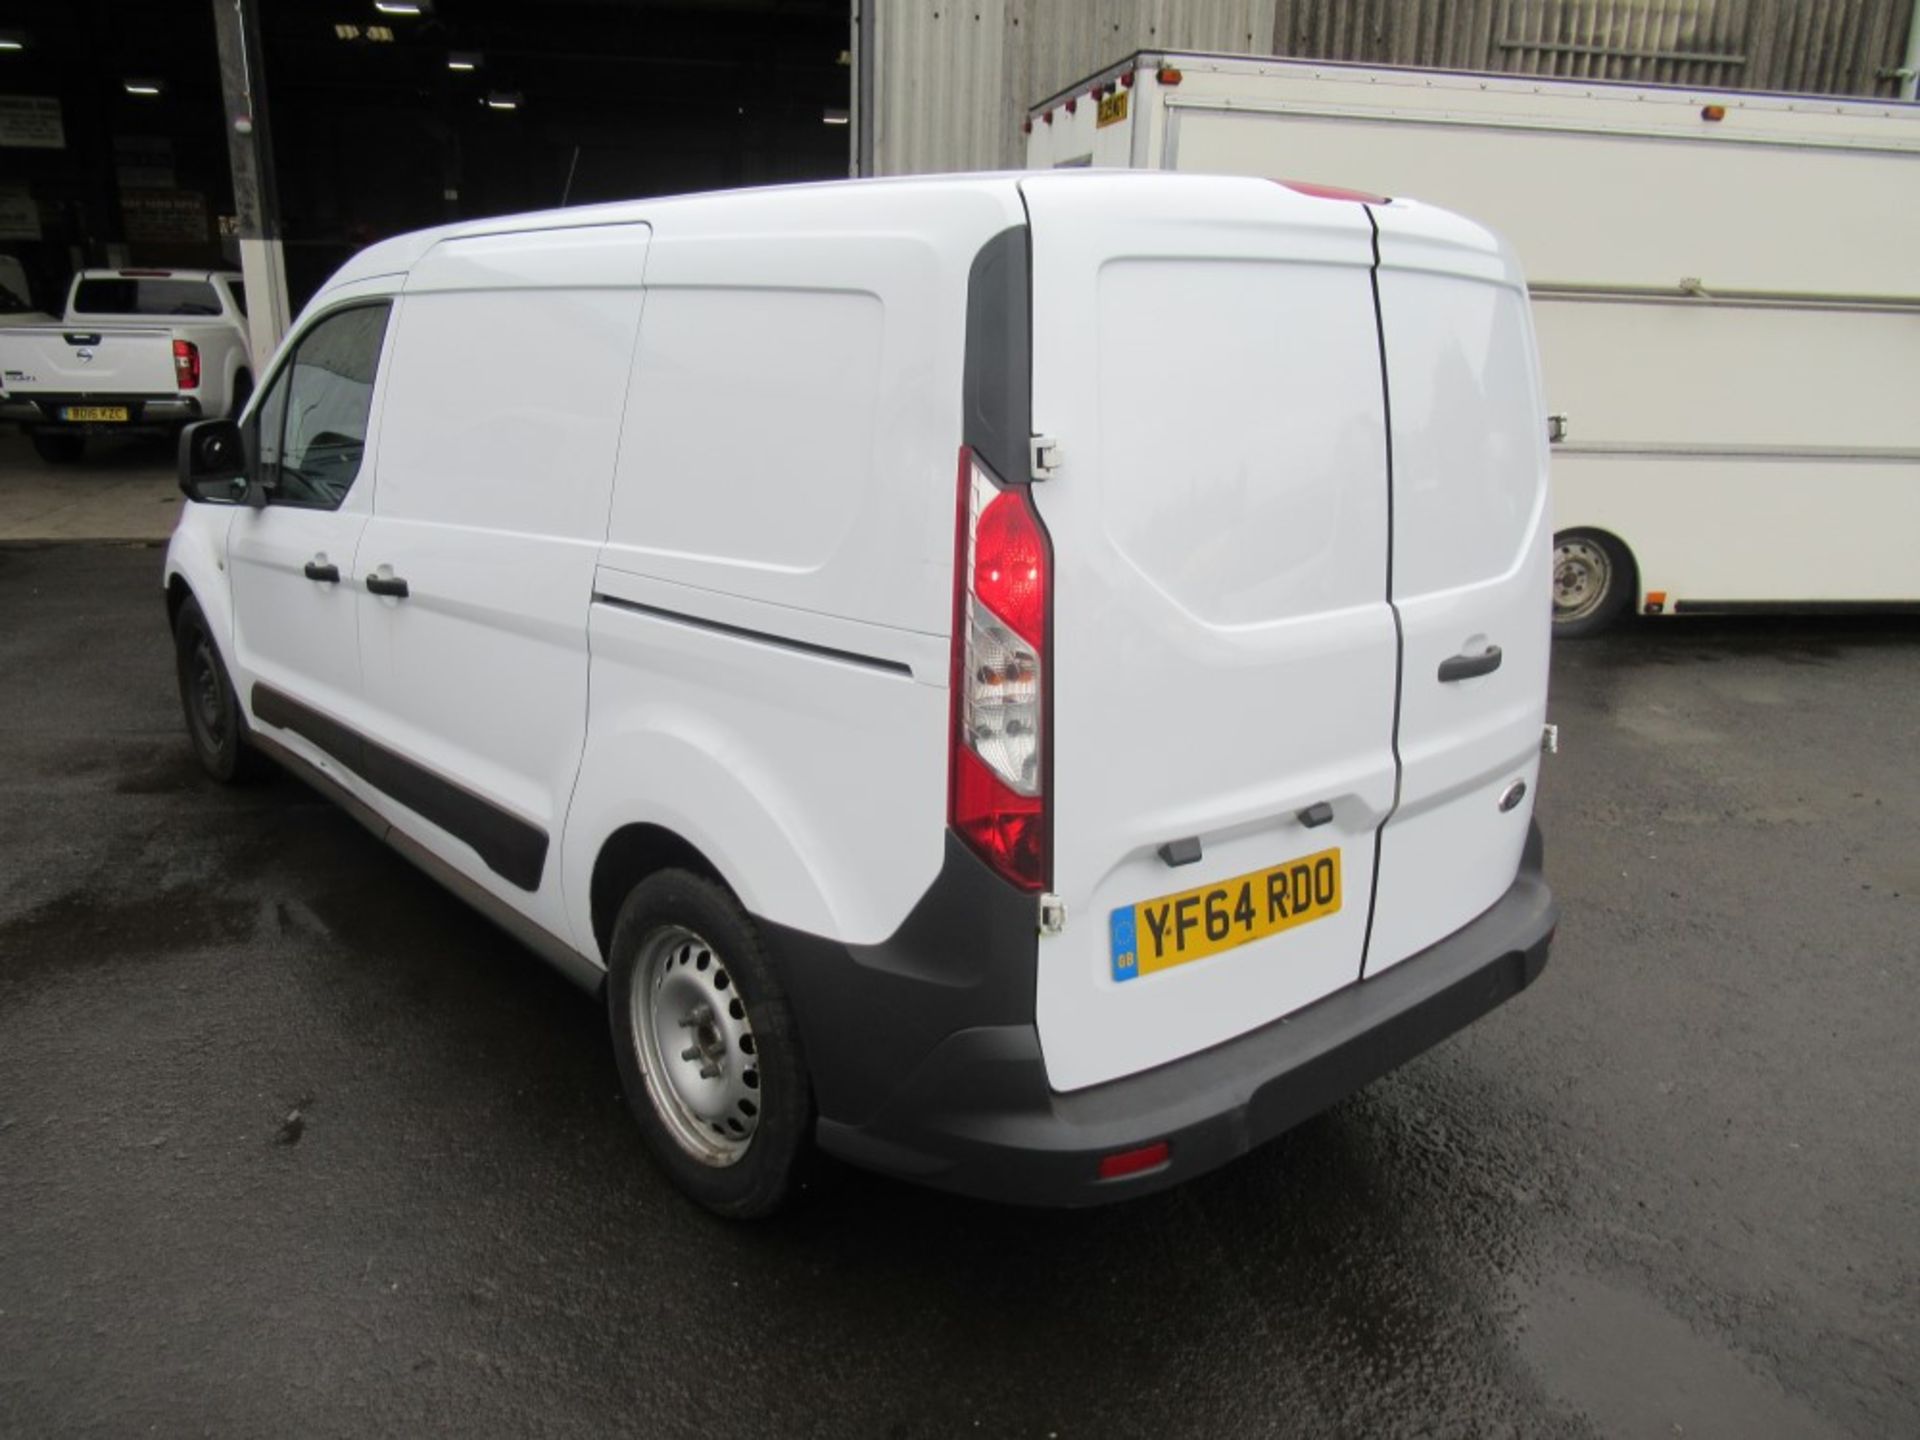 64 reg FORD TRANSIT CONNECT 210 ECO-TECH, 1ST REG 01/15, 108763M WARRANTED, V5 HERE, 1 OWNER FROM - Image 3 of 6